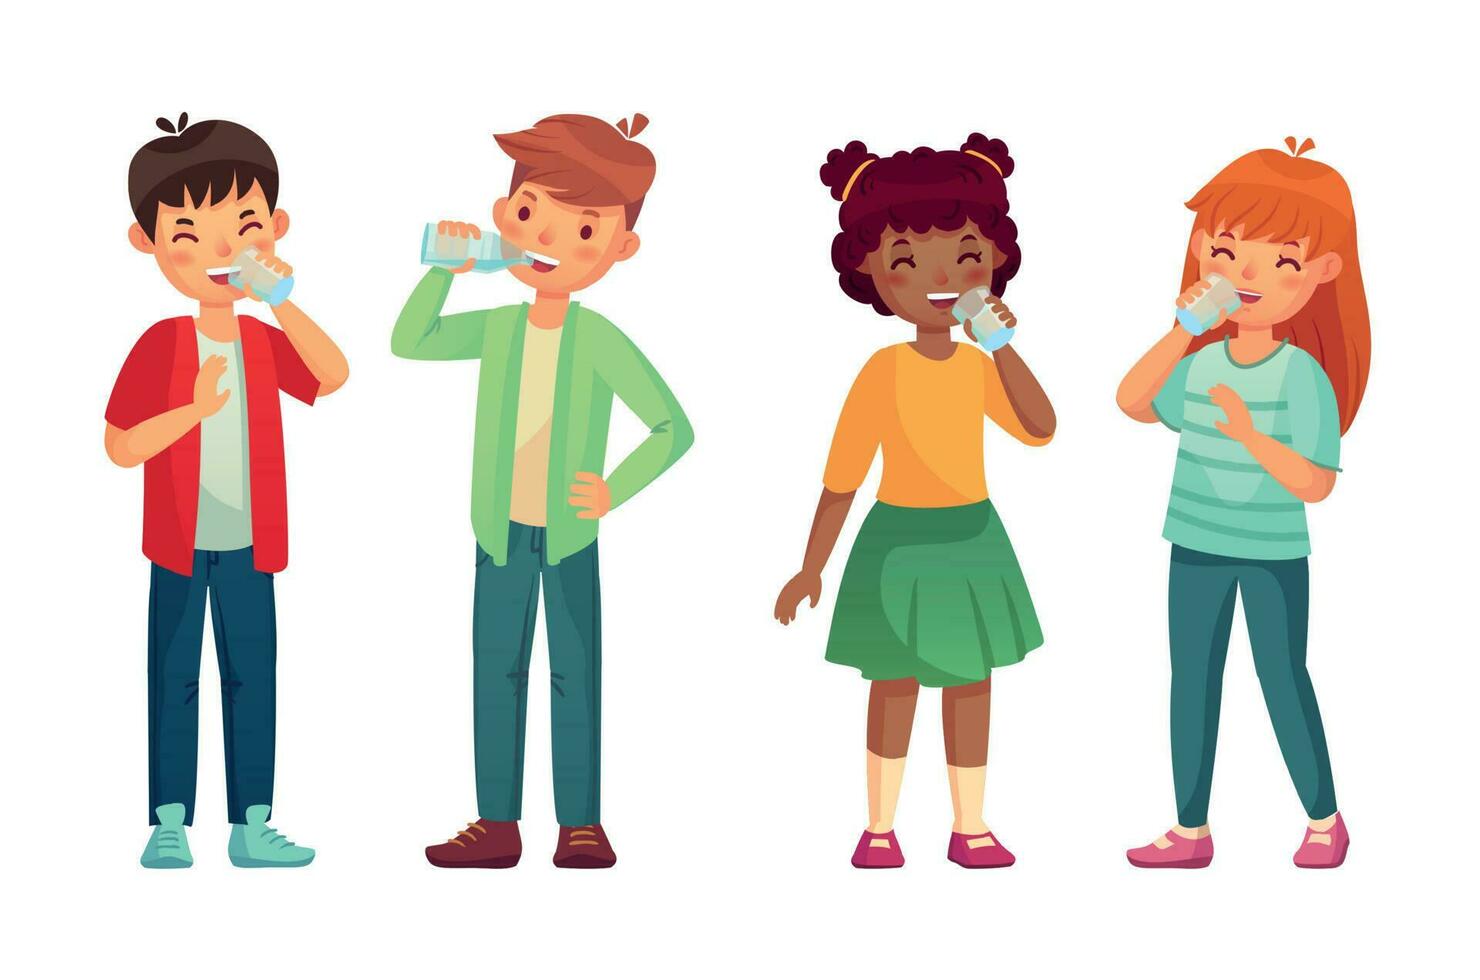 Kids drink glass of water. Happy boy and girl drinks. Children drinking hydration level care vector cartoon illustration